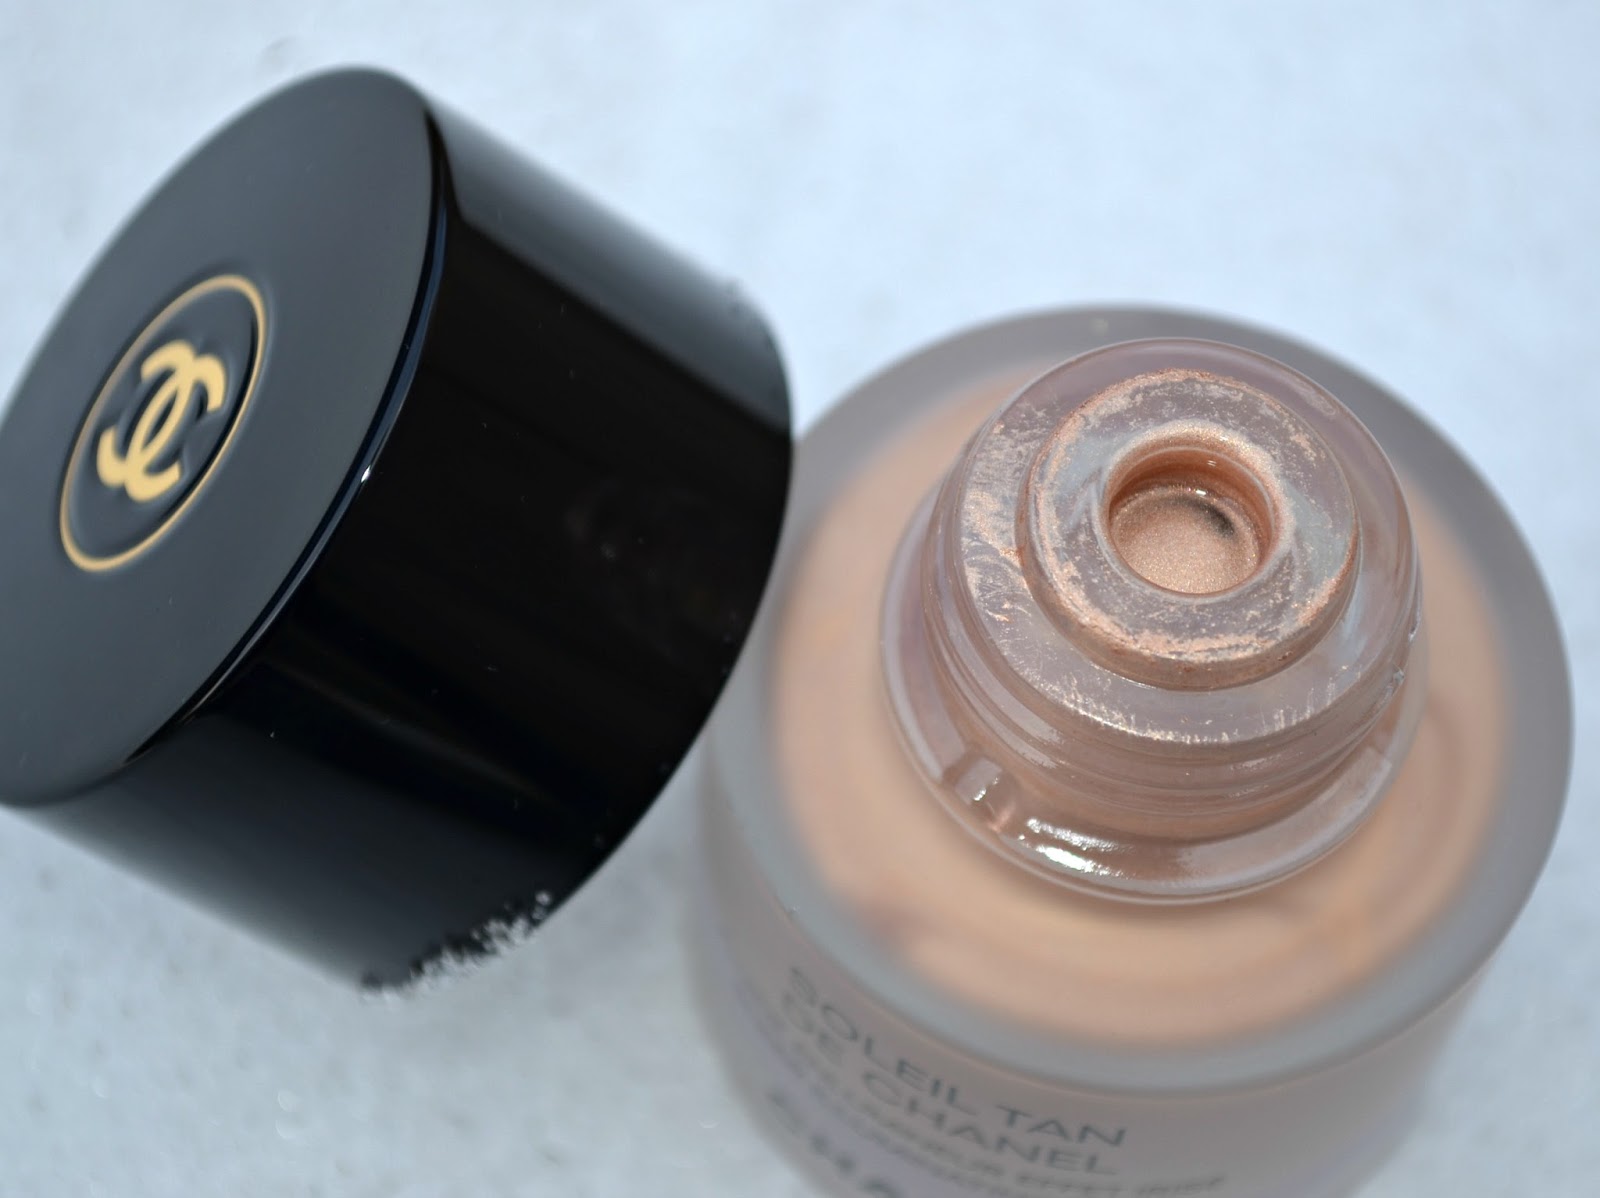 Chanel Pearly Glow, Sunkissed Sheer Healthy Glow Fluid